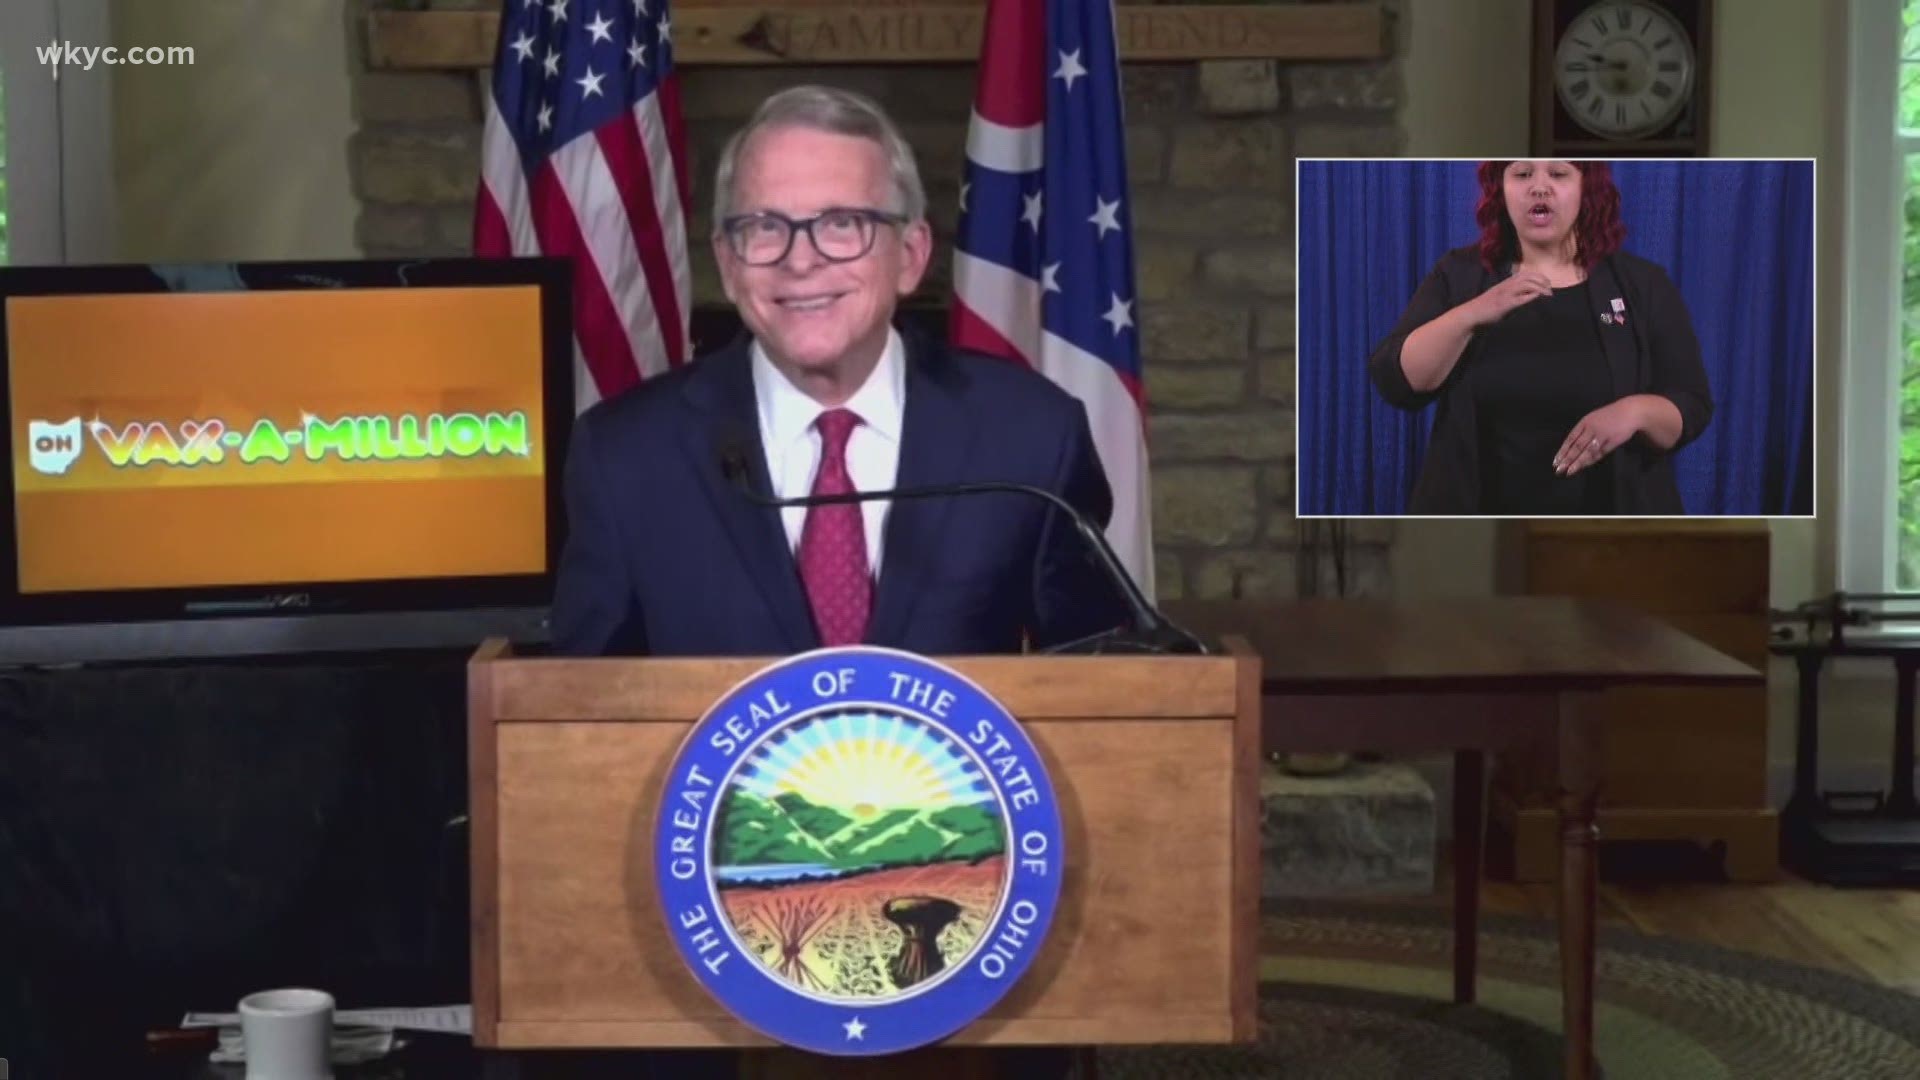 Ohio Gov. Mike DeWine offered this response to Jim Renacci's decision to run against him for governor.